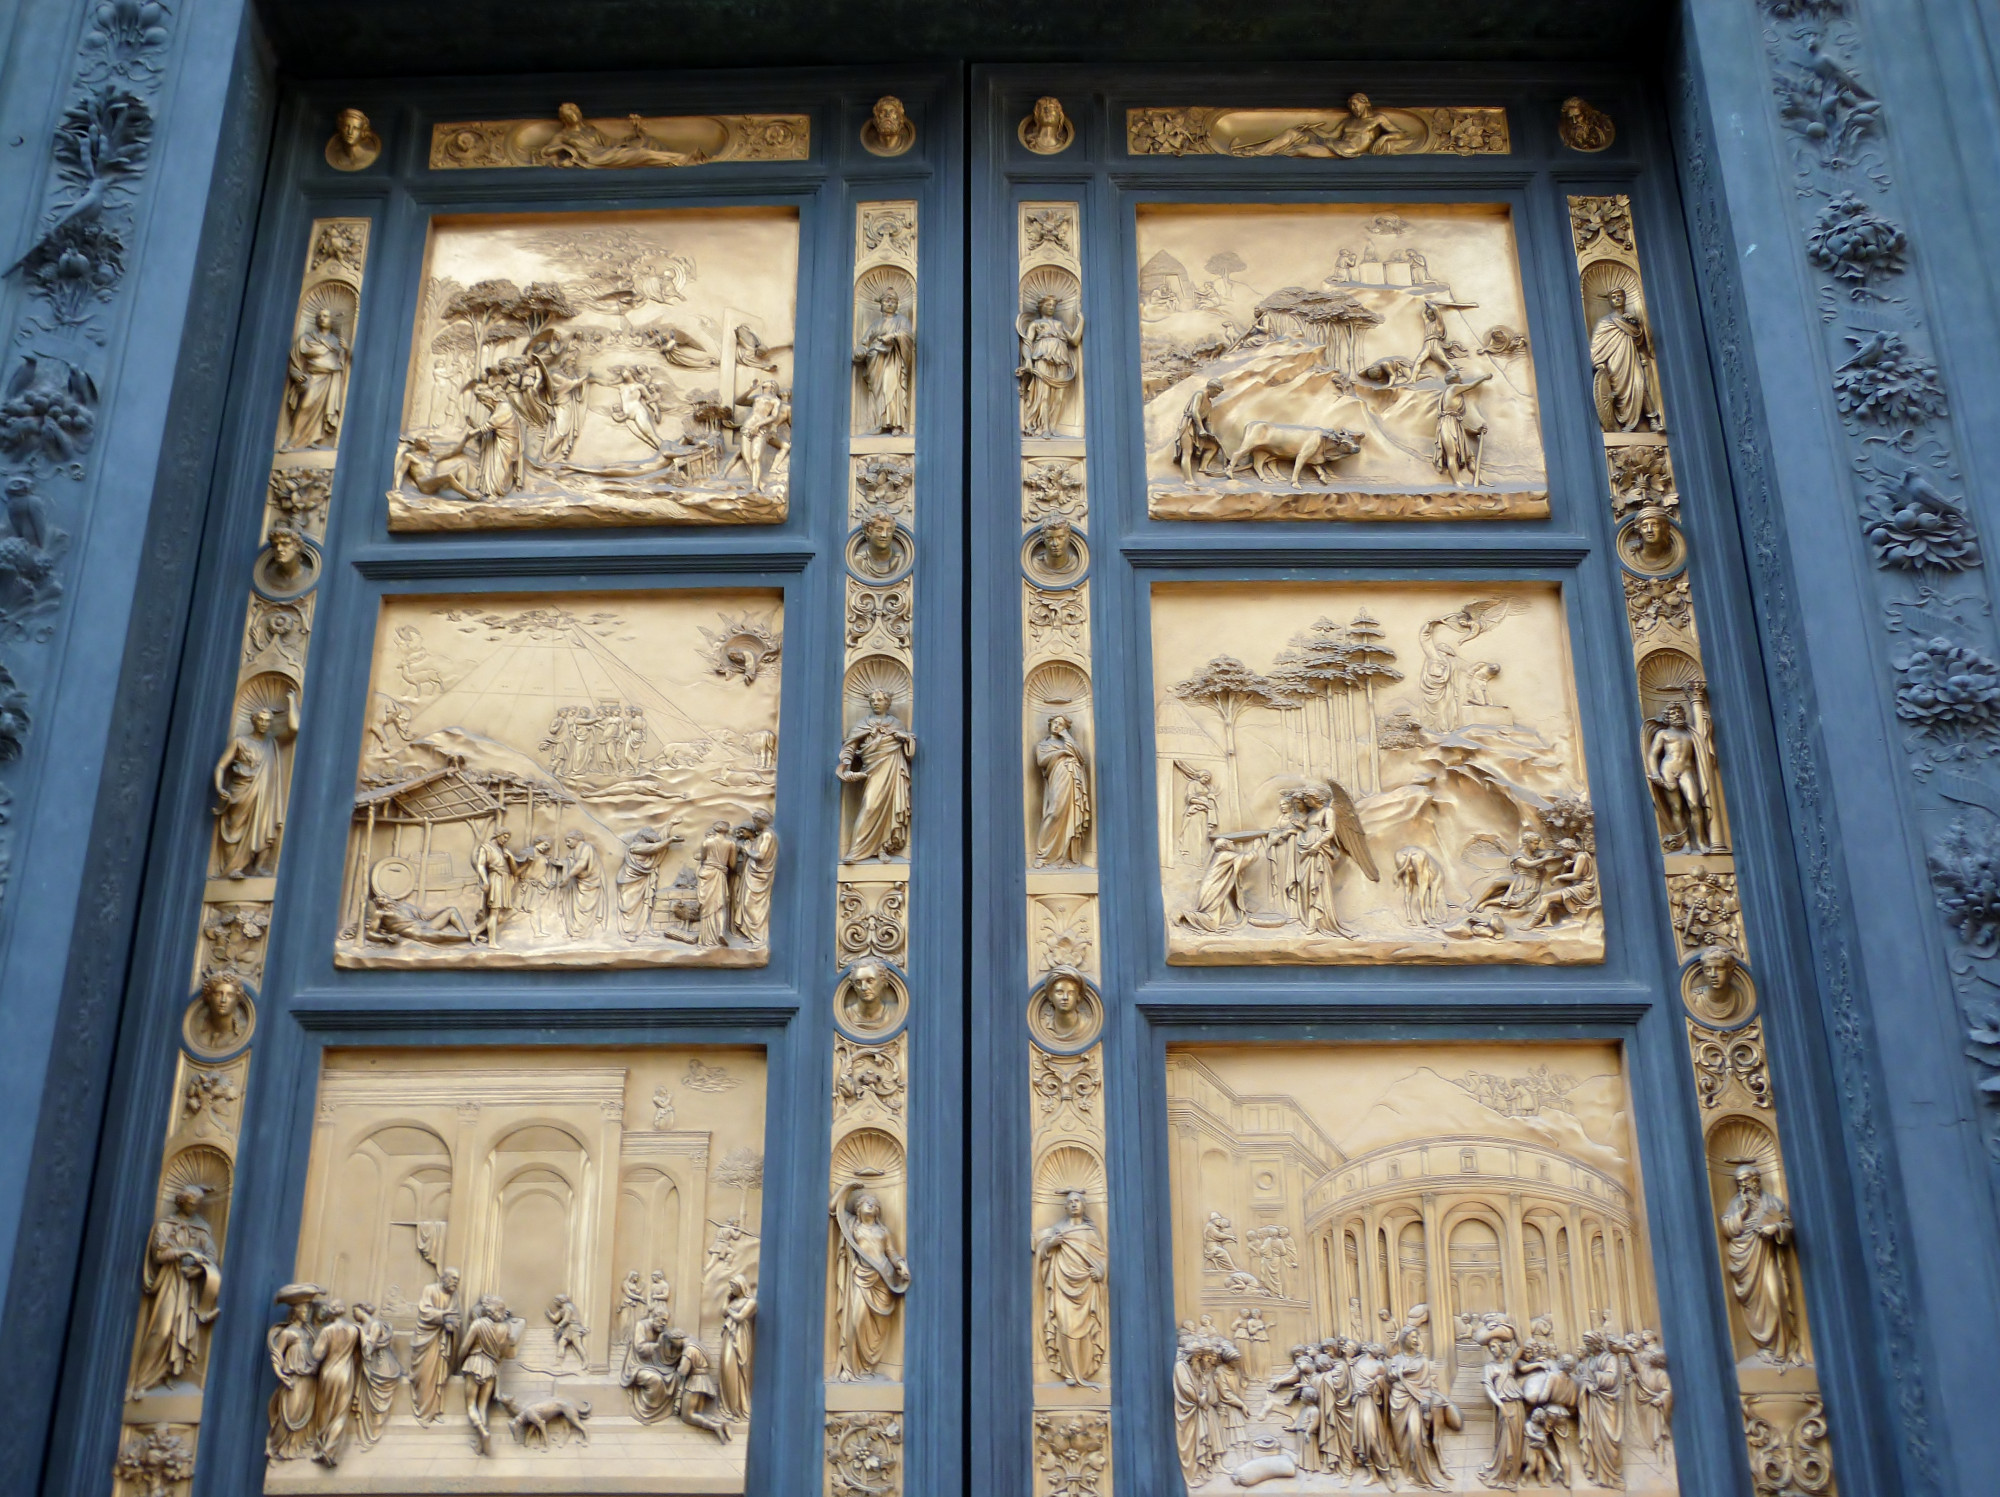 Replica of The Gates of Paradise entrance to the baptistery